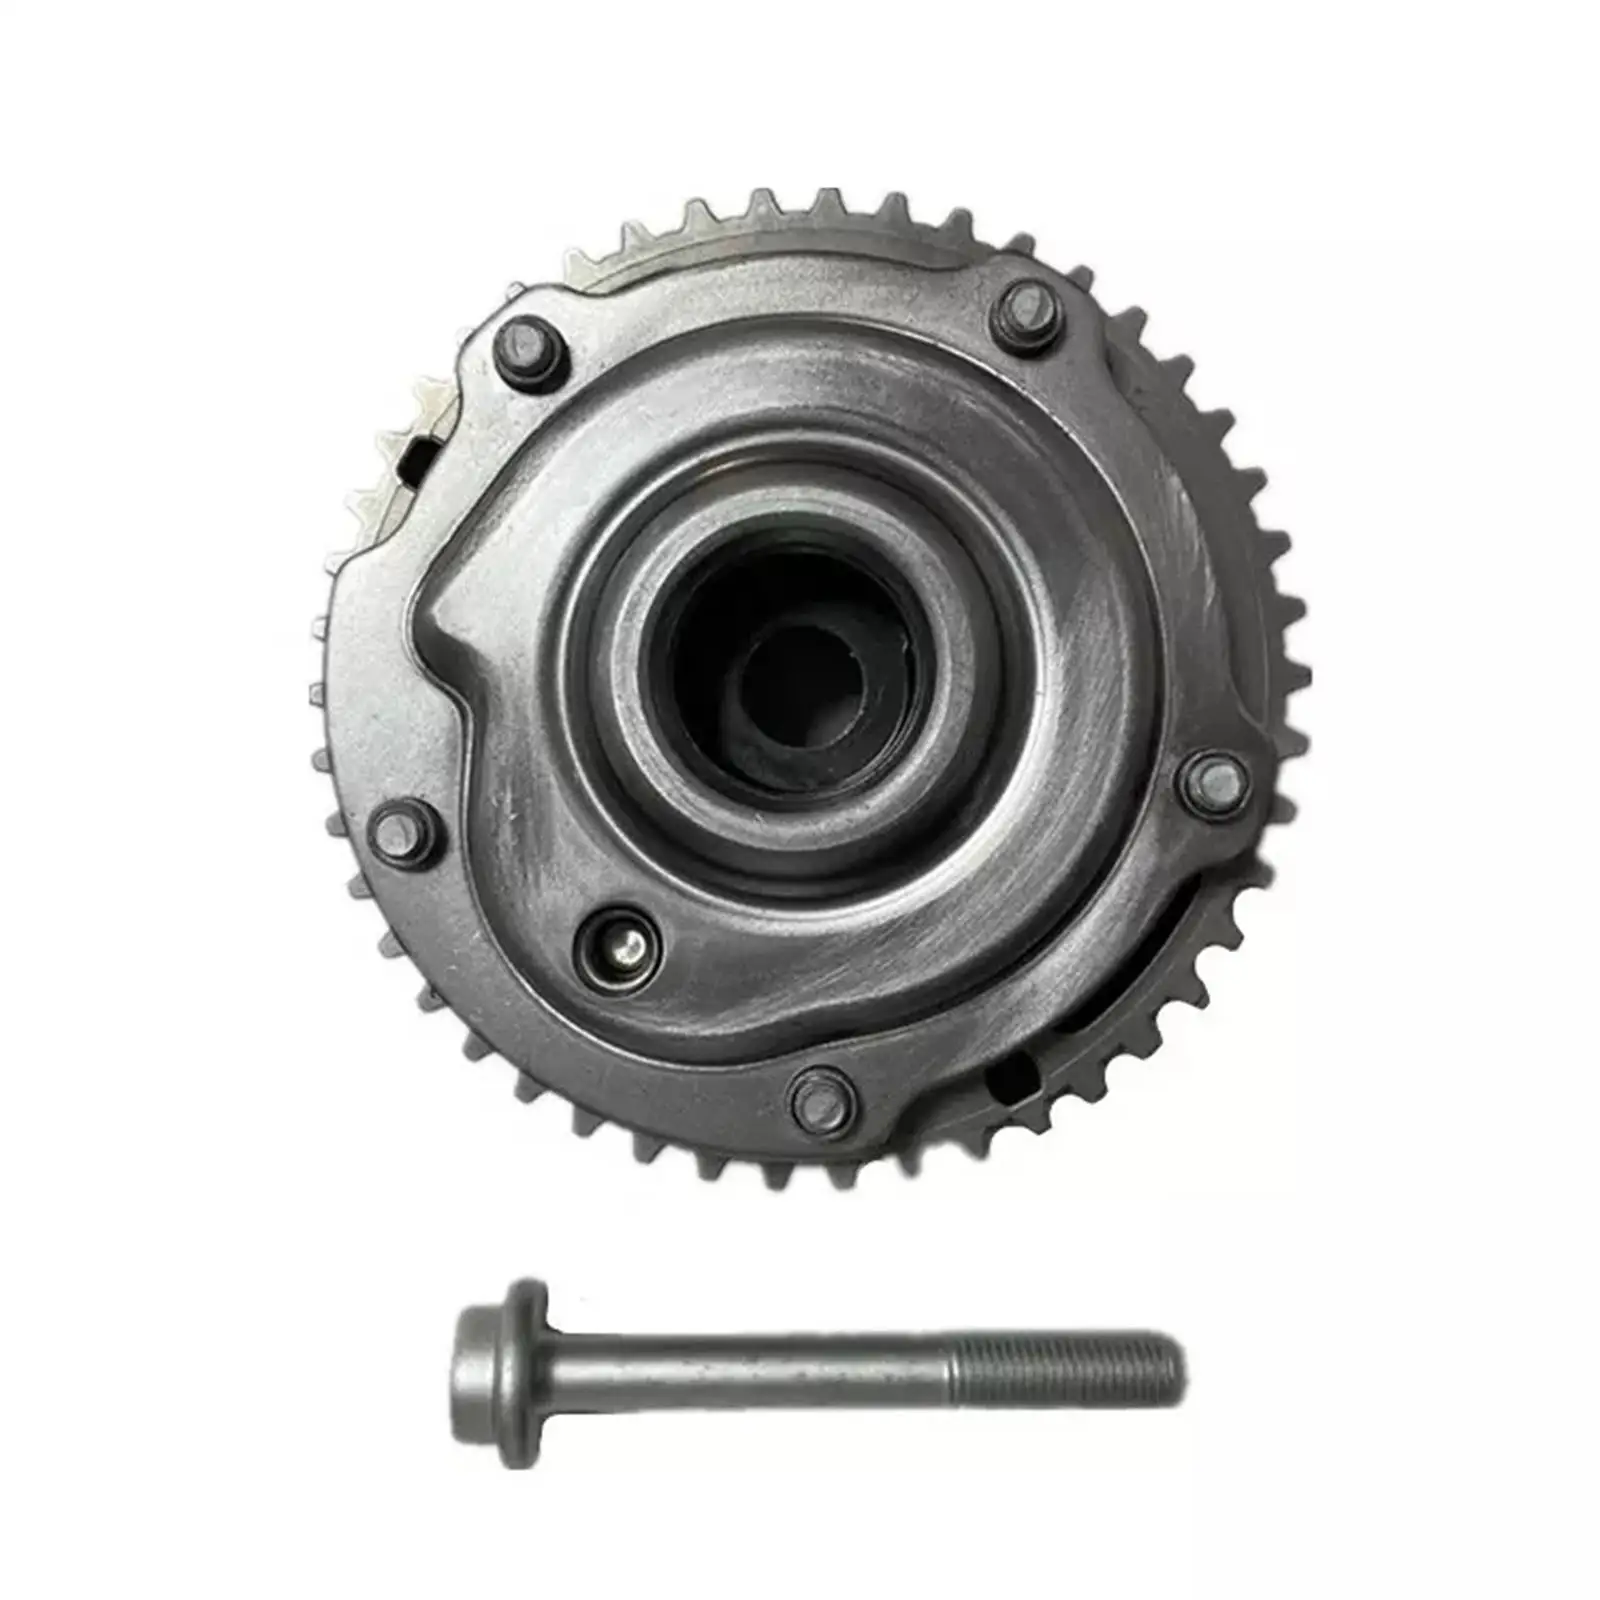 Engine Timing Camshaft gear 71744384 Durable Intake Exhaust cam Sprocket Replacement 5636631 5636632 for Cruze